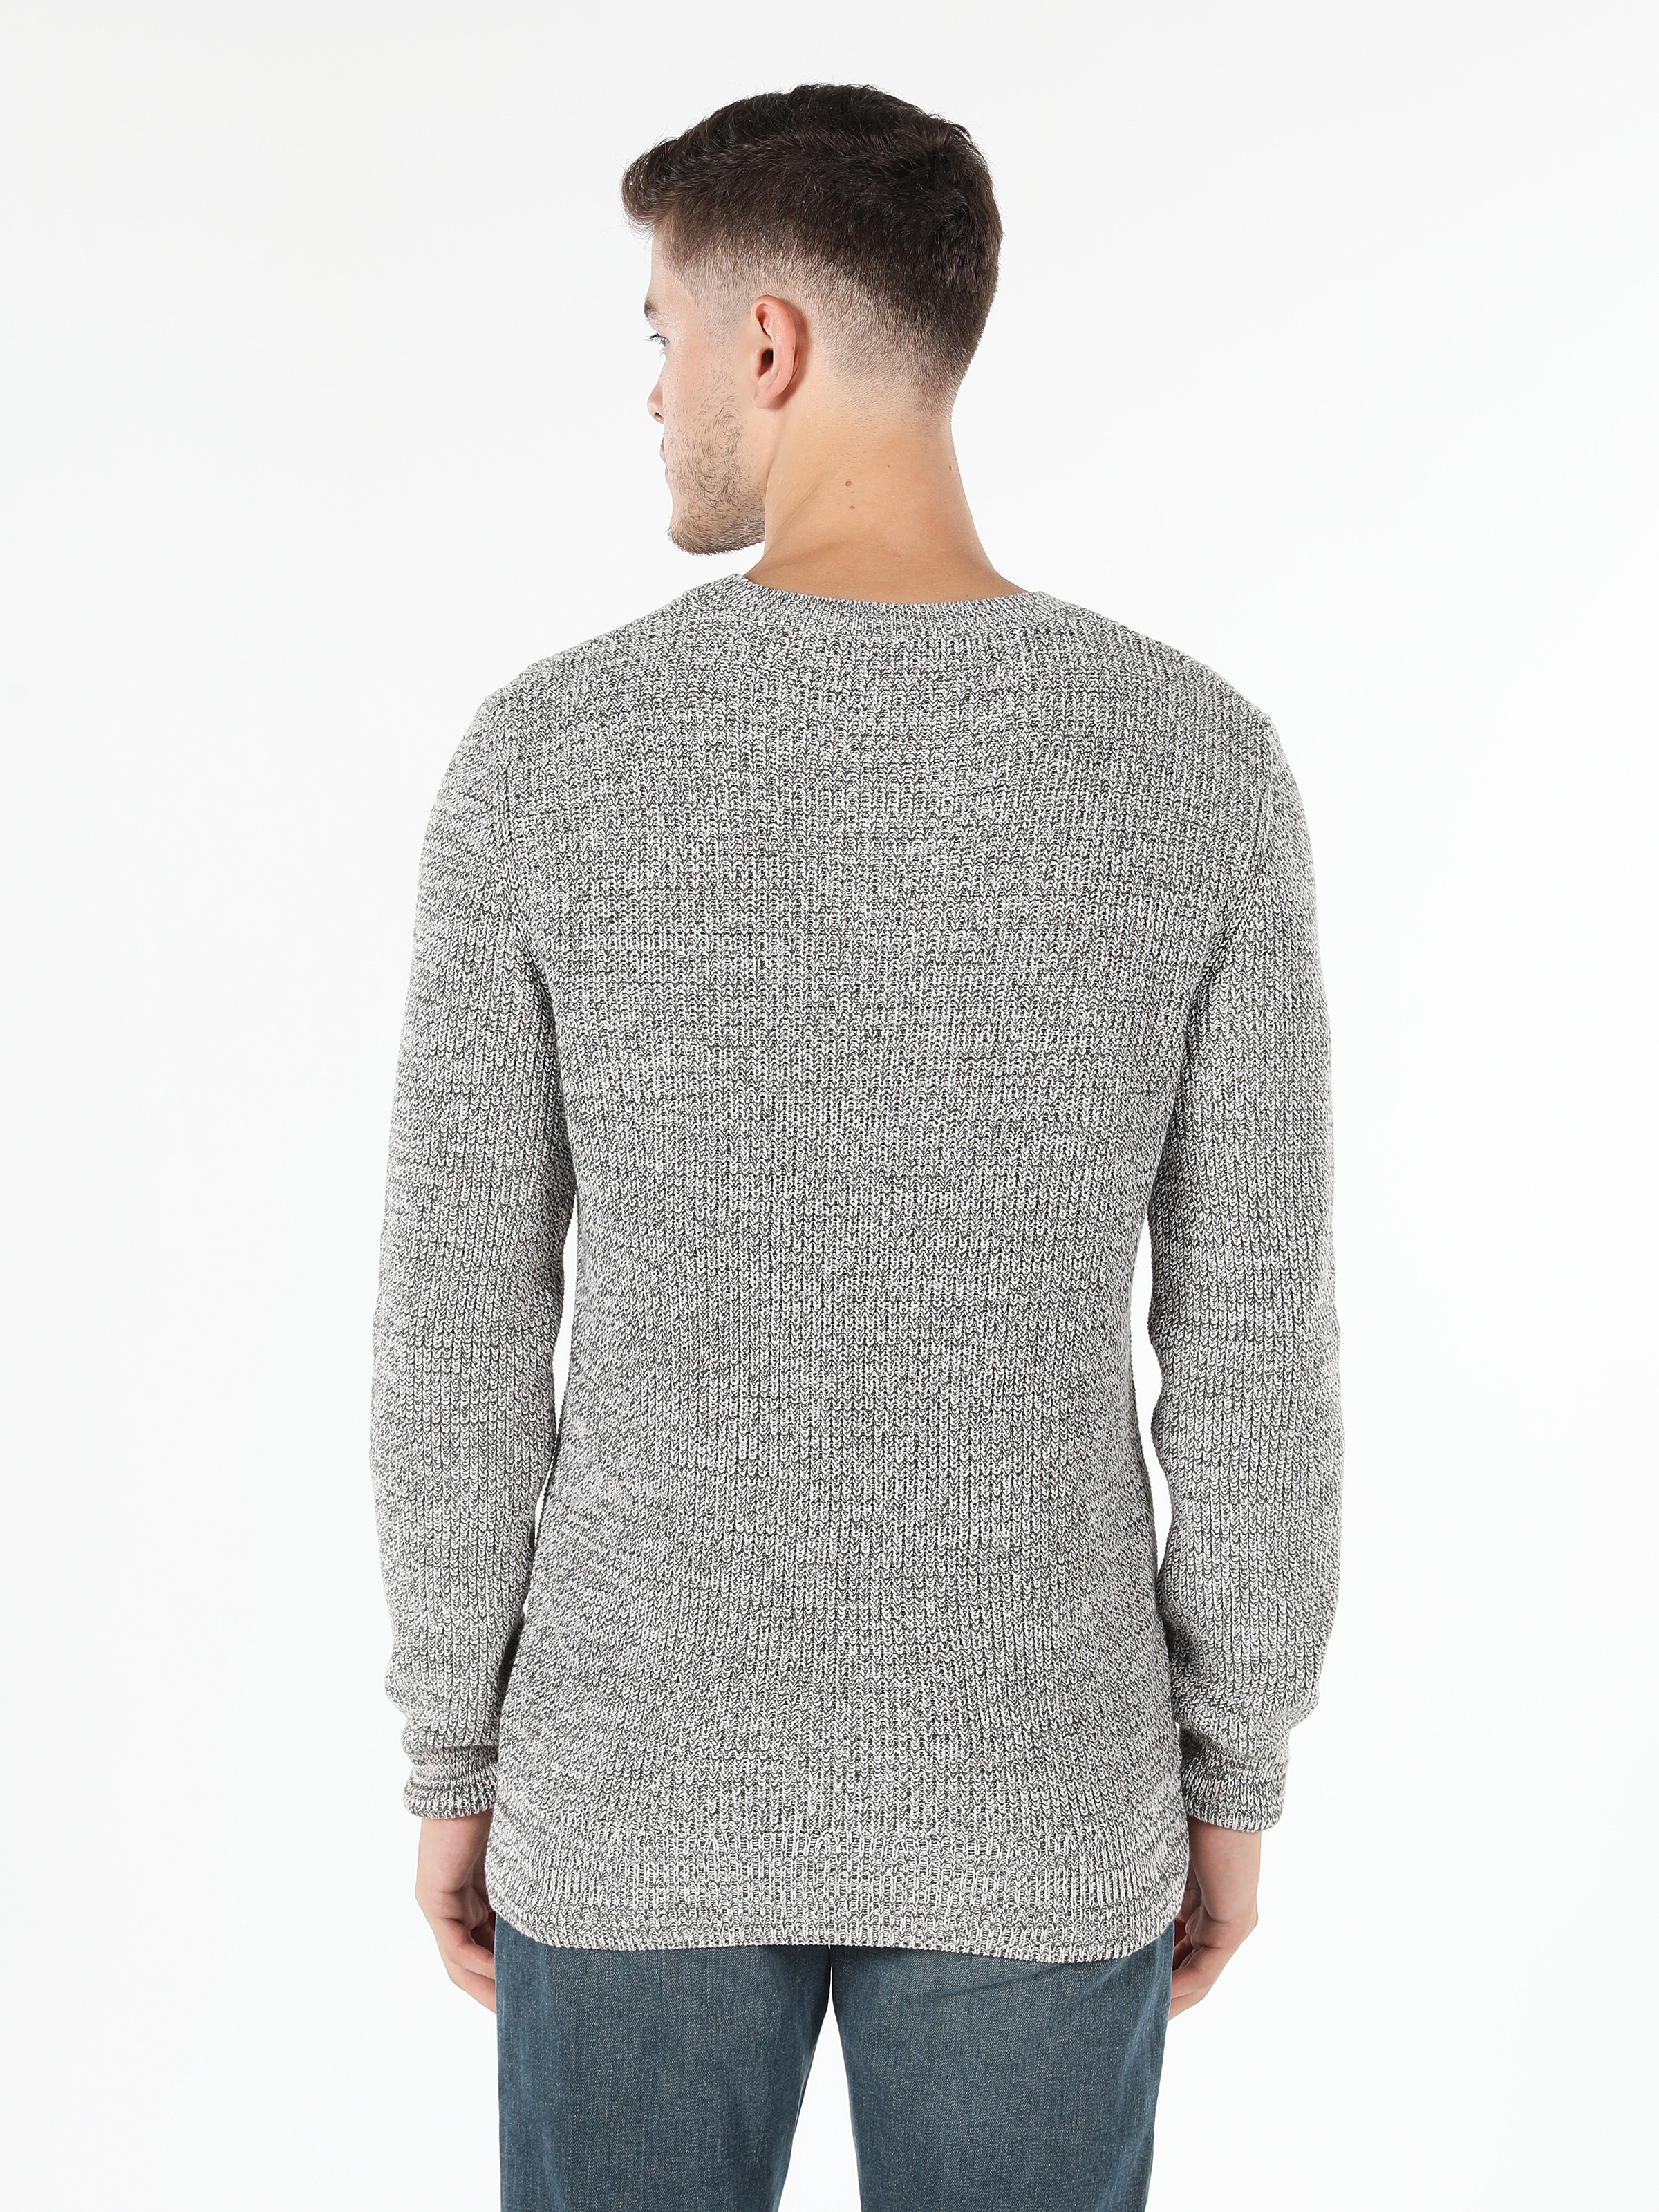 Pull Homme Beige Coupe Slim Col Rond Coupe Étroite